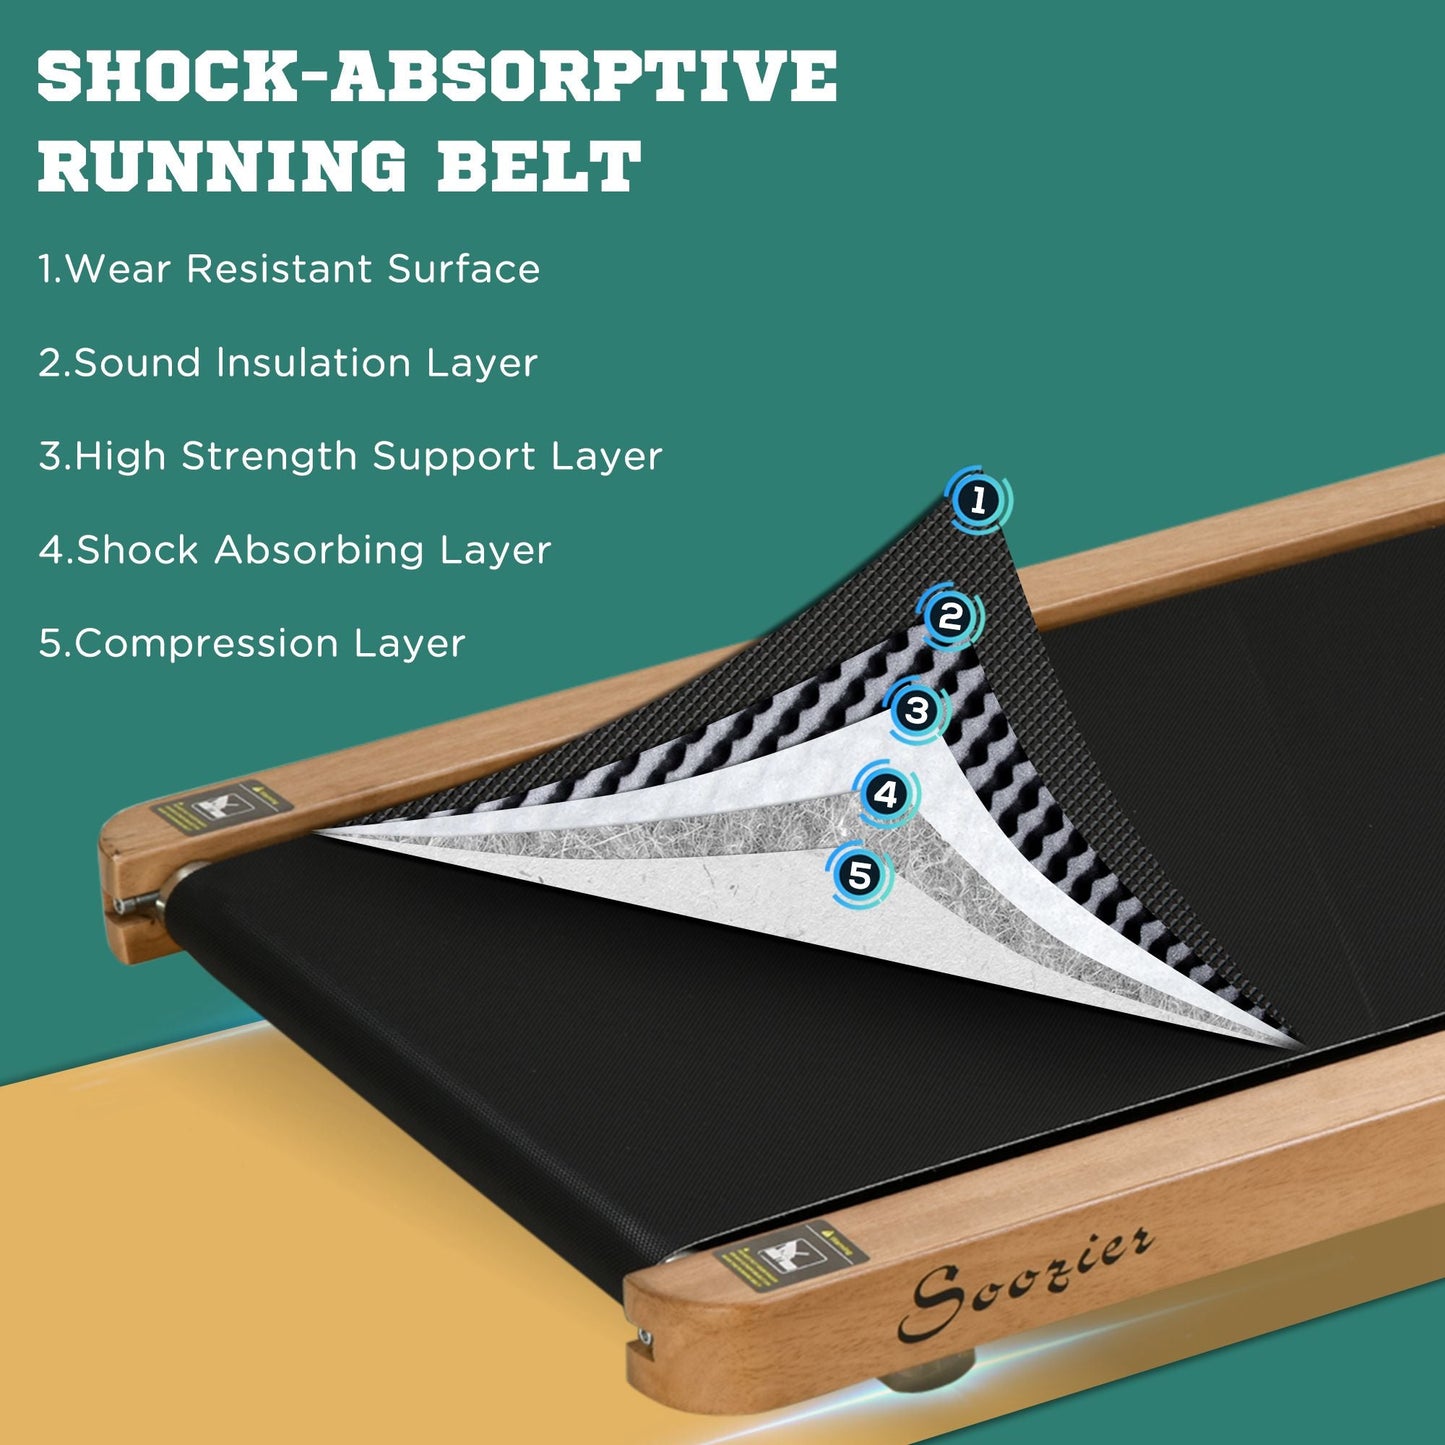 Sports and Fitness-Wood Walking Pad, Under Desk Treadmill, Walking Jogging Machine with Blue Tooth Speaker, 12 Pre-Programs, Transport Wheels for Home Gym Office - Outdoor Style Company